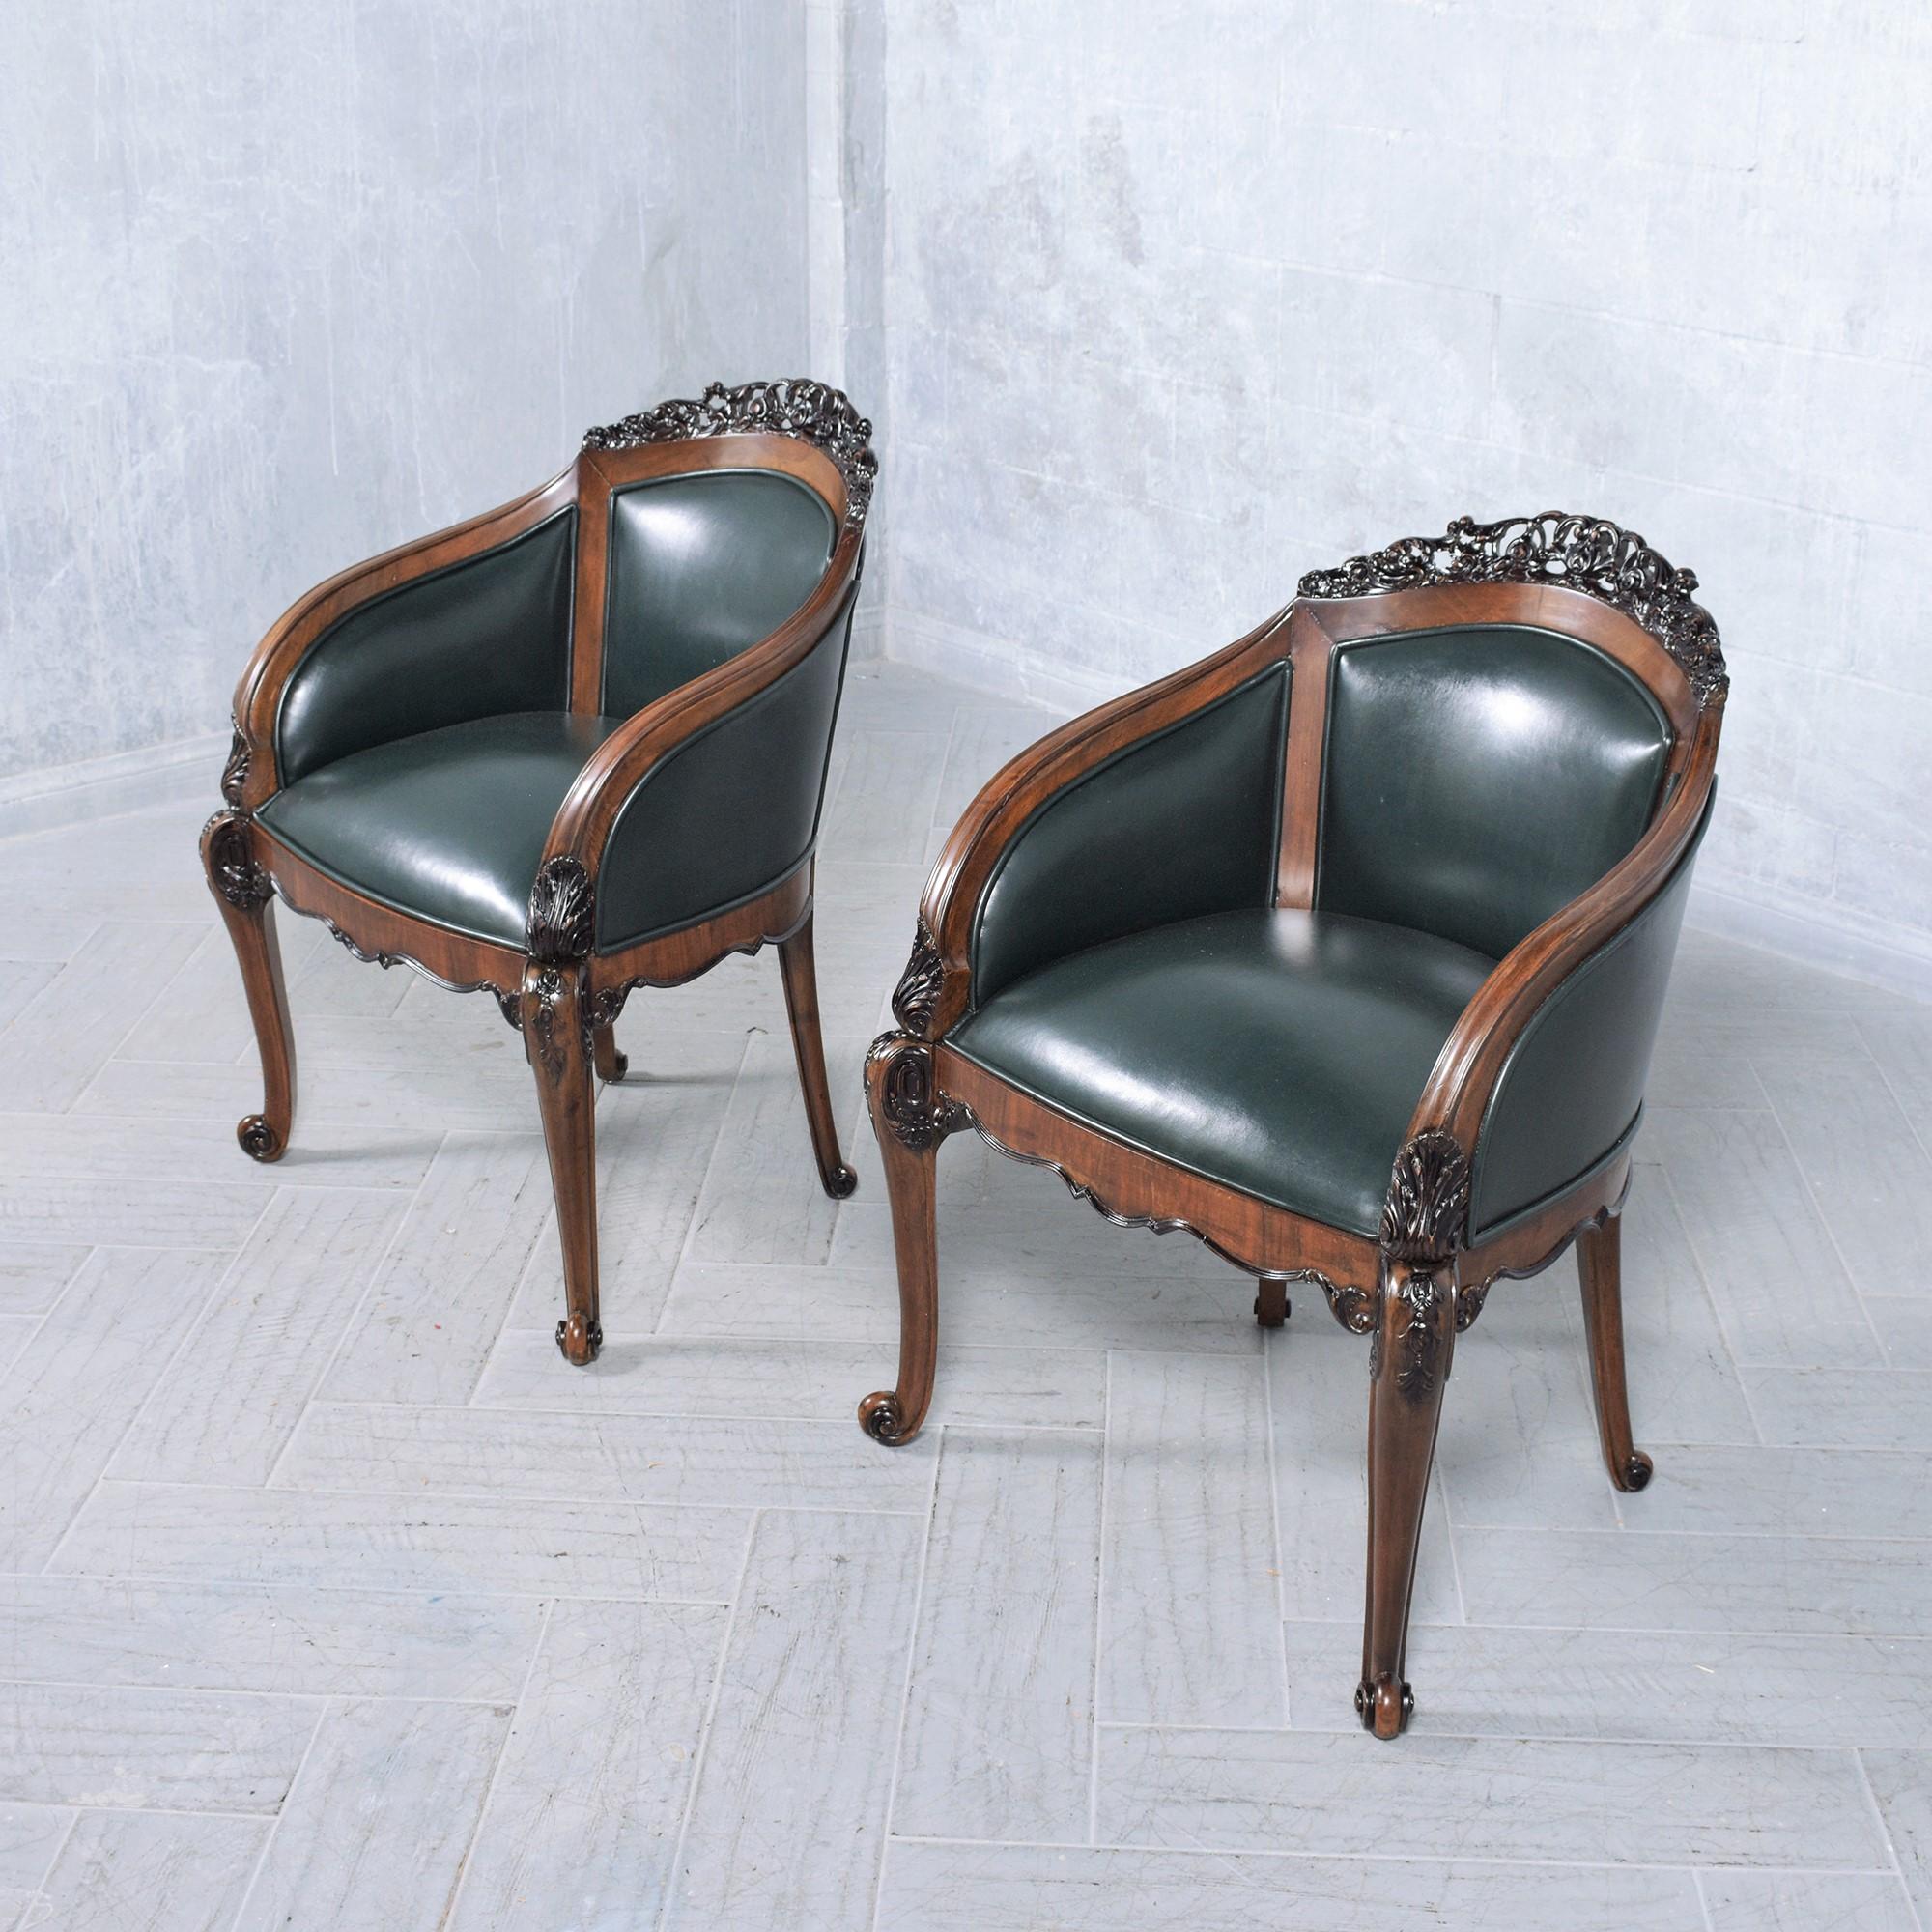 19th-Century English Chinoiserie Bergères: Restored Elegance in Green Leather For Sale 2